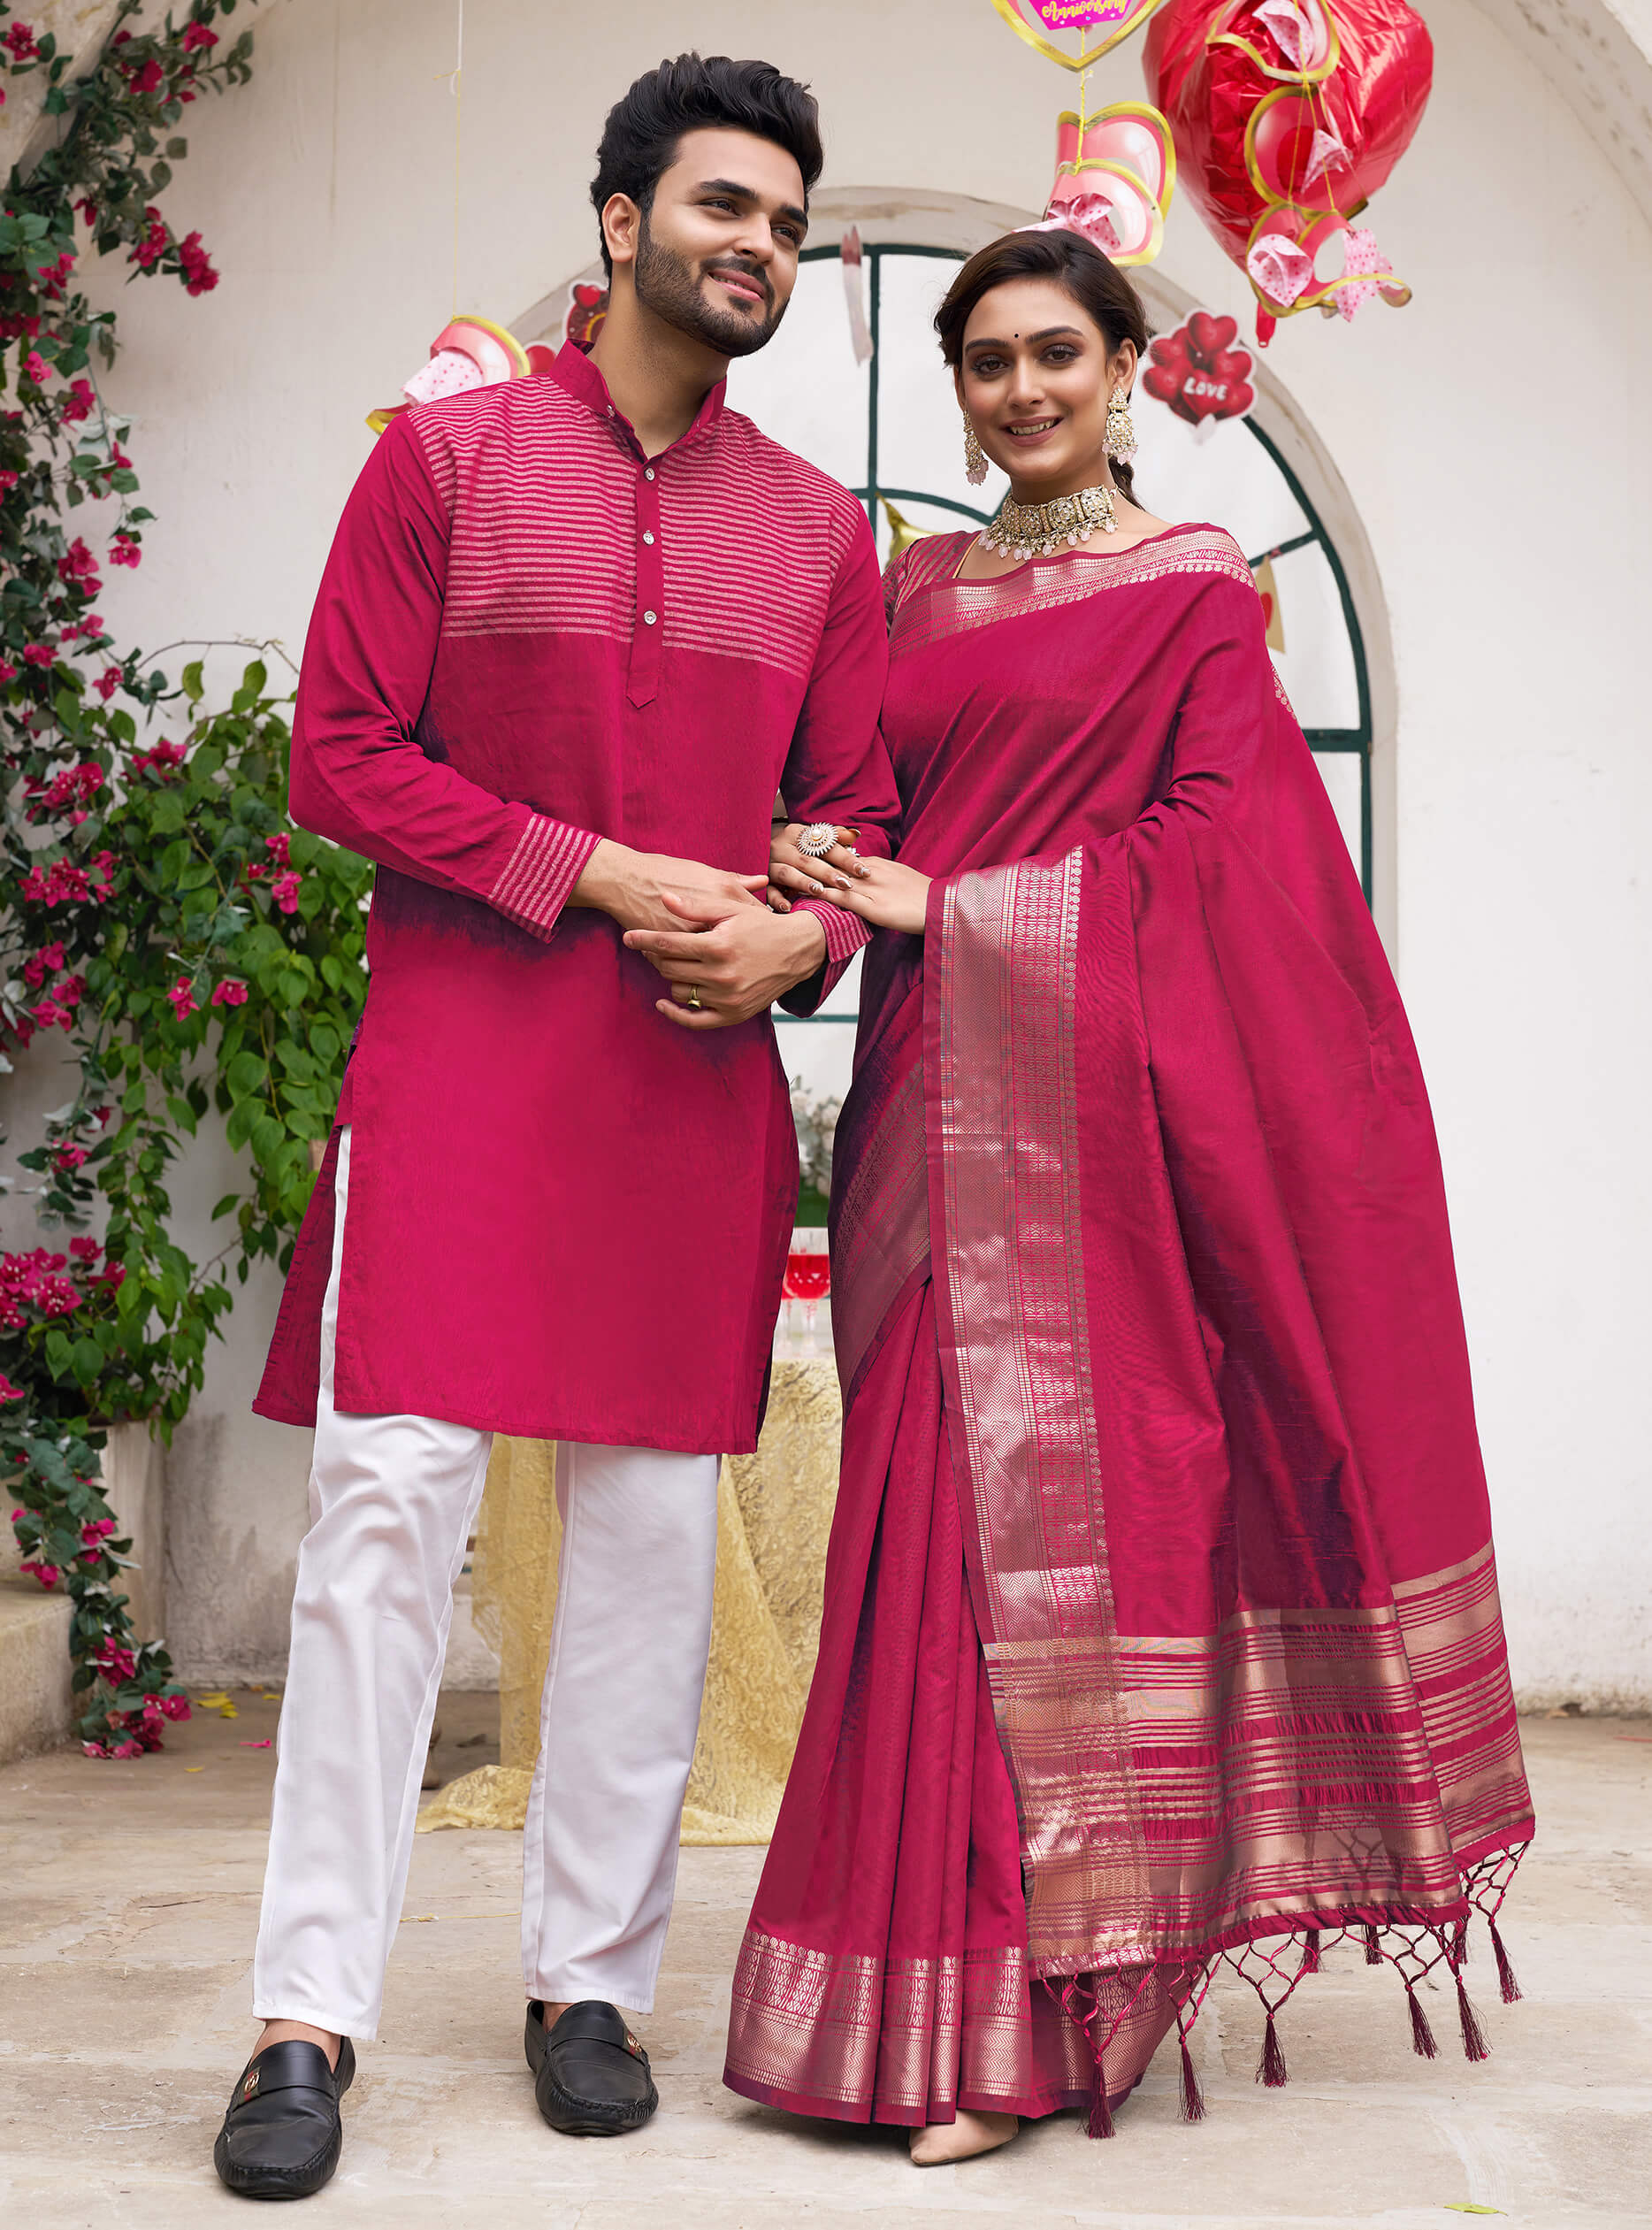 Couple Wedding Wear Set Colours You Don't Want to Miss Out On!